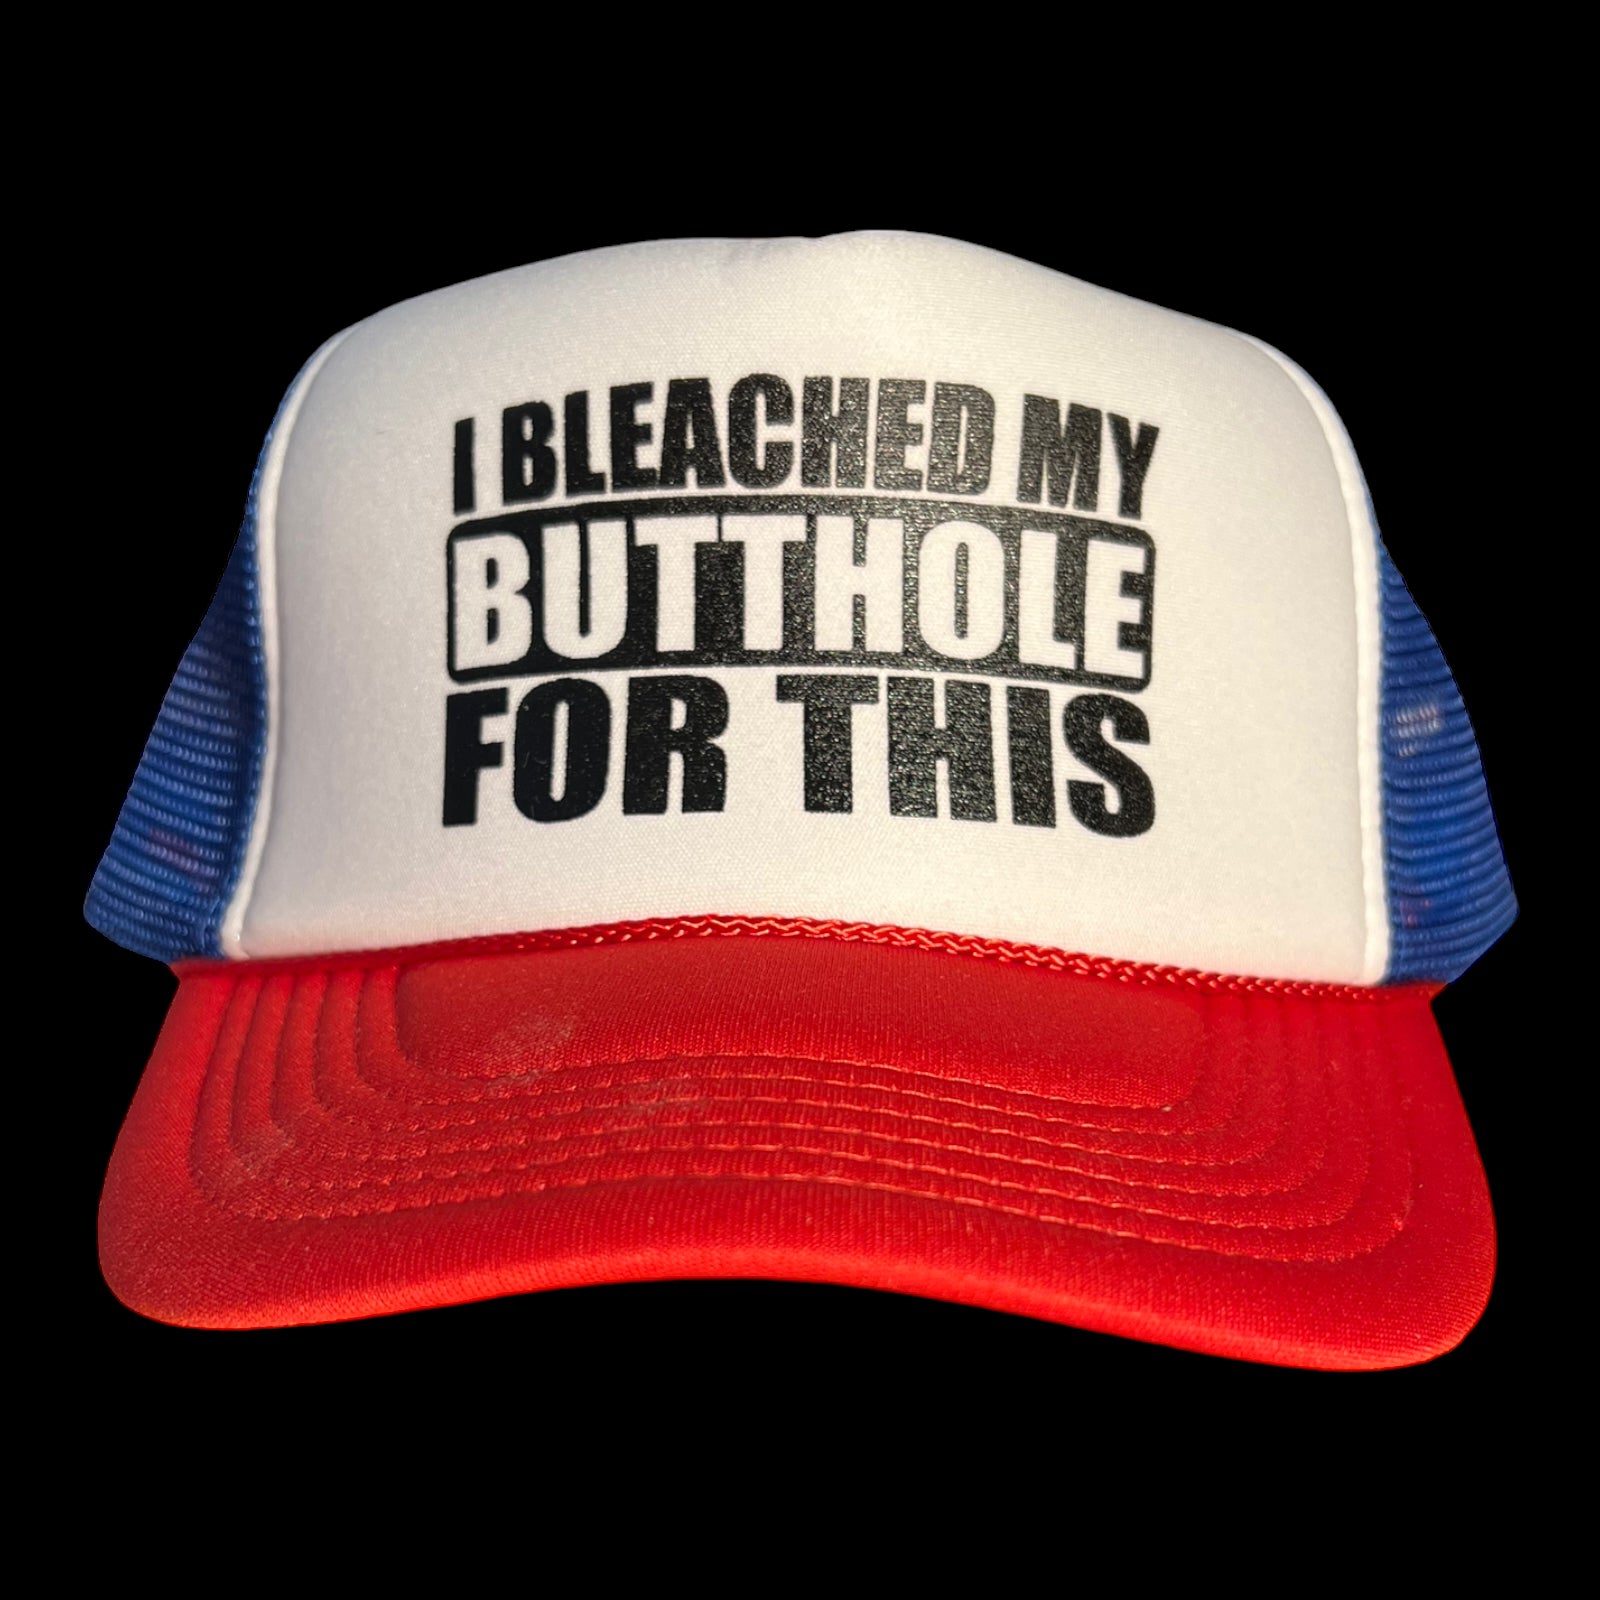 I Bleached My Butthole For This Trucker Hat Funny Trucker Hat Red/Whit –  FunnyTruckerHats